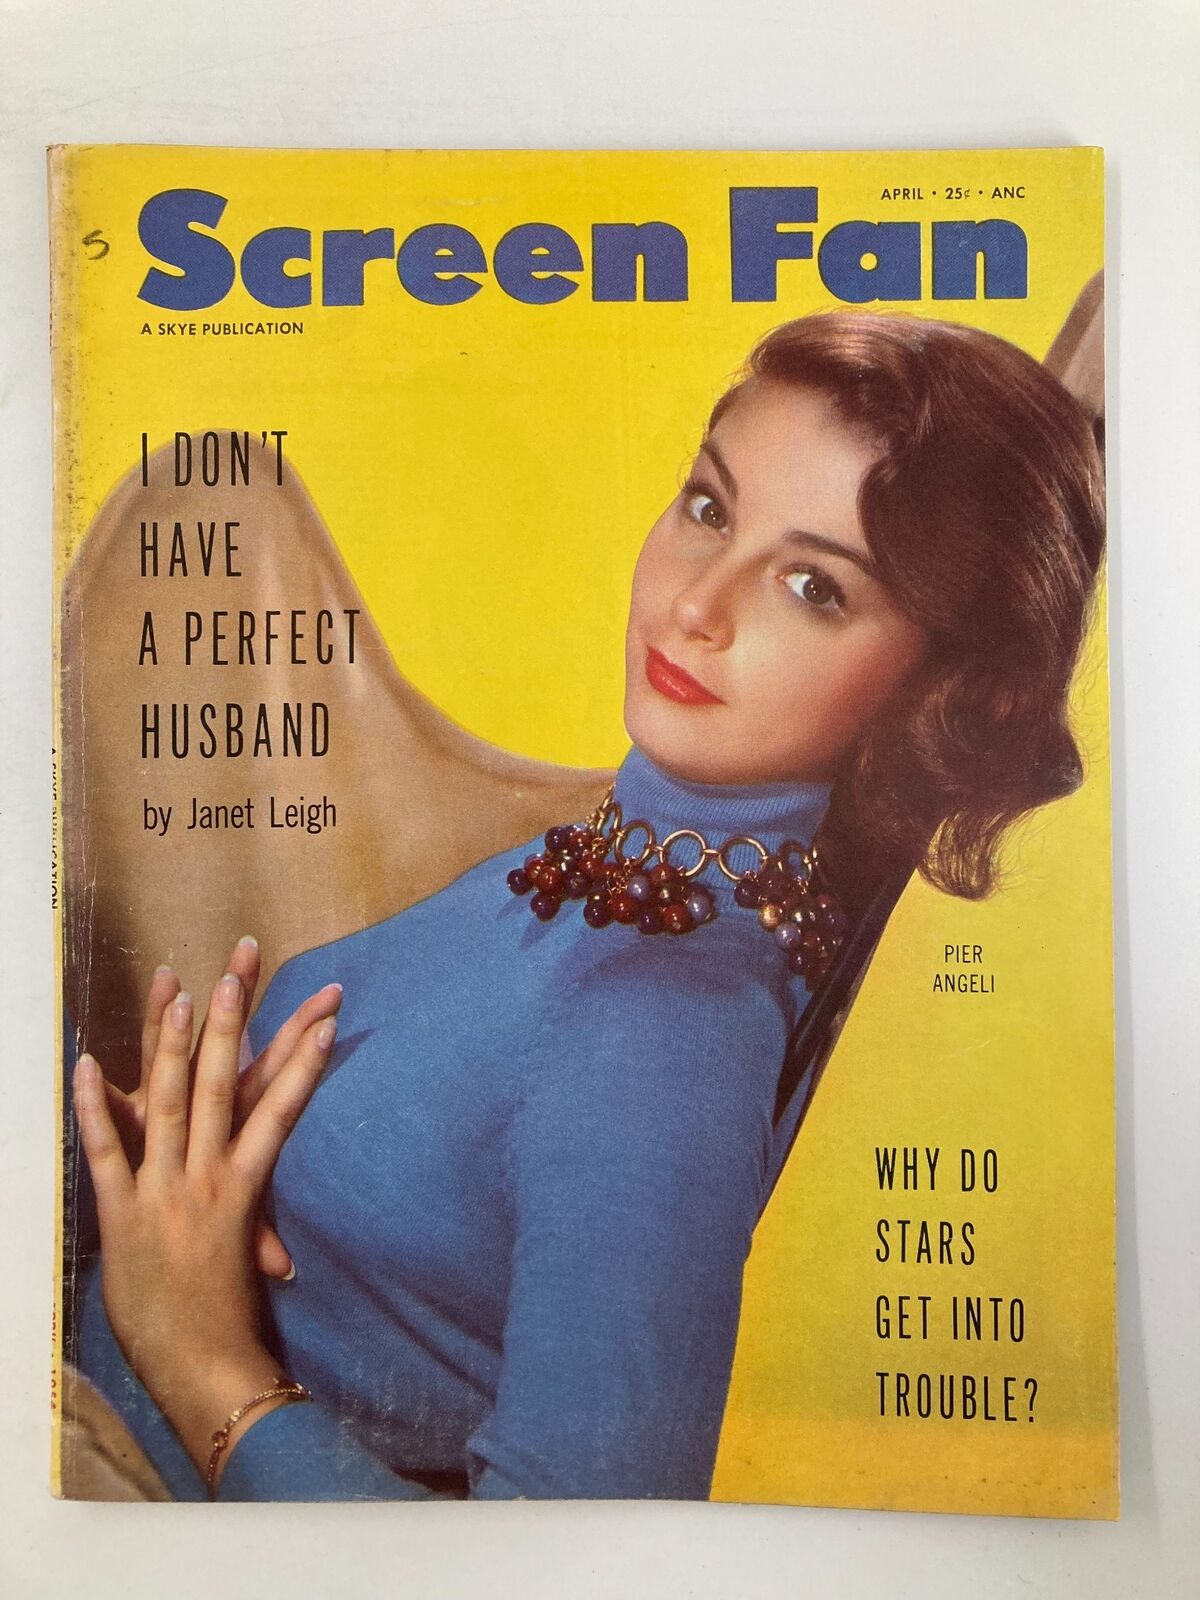 VTG Screen Fan Magazine April 1954 Pier Angeli The Flame and The Flesh No Label